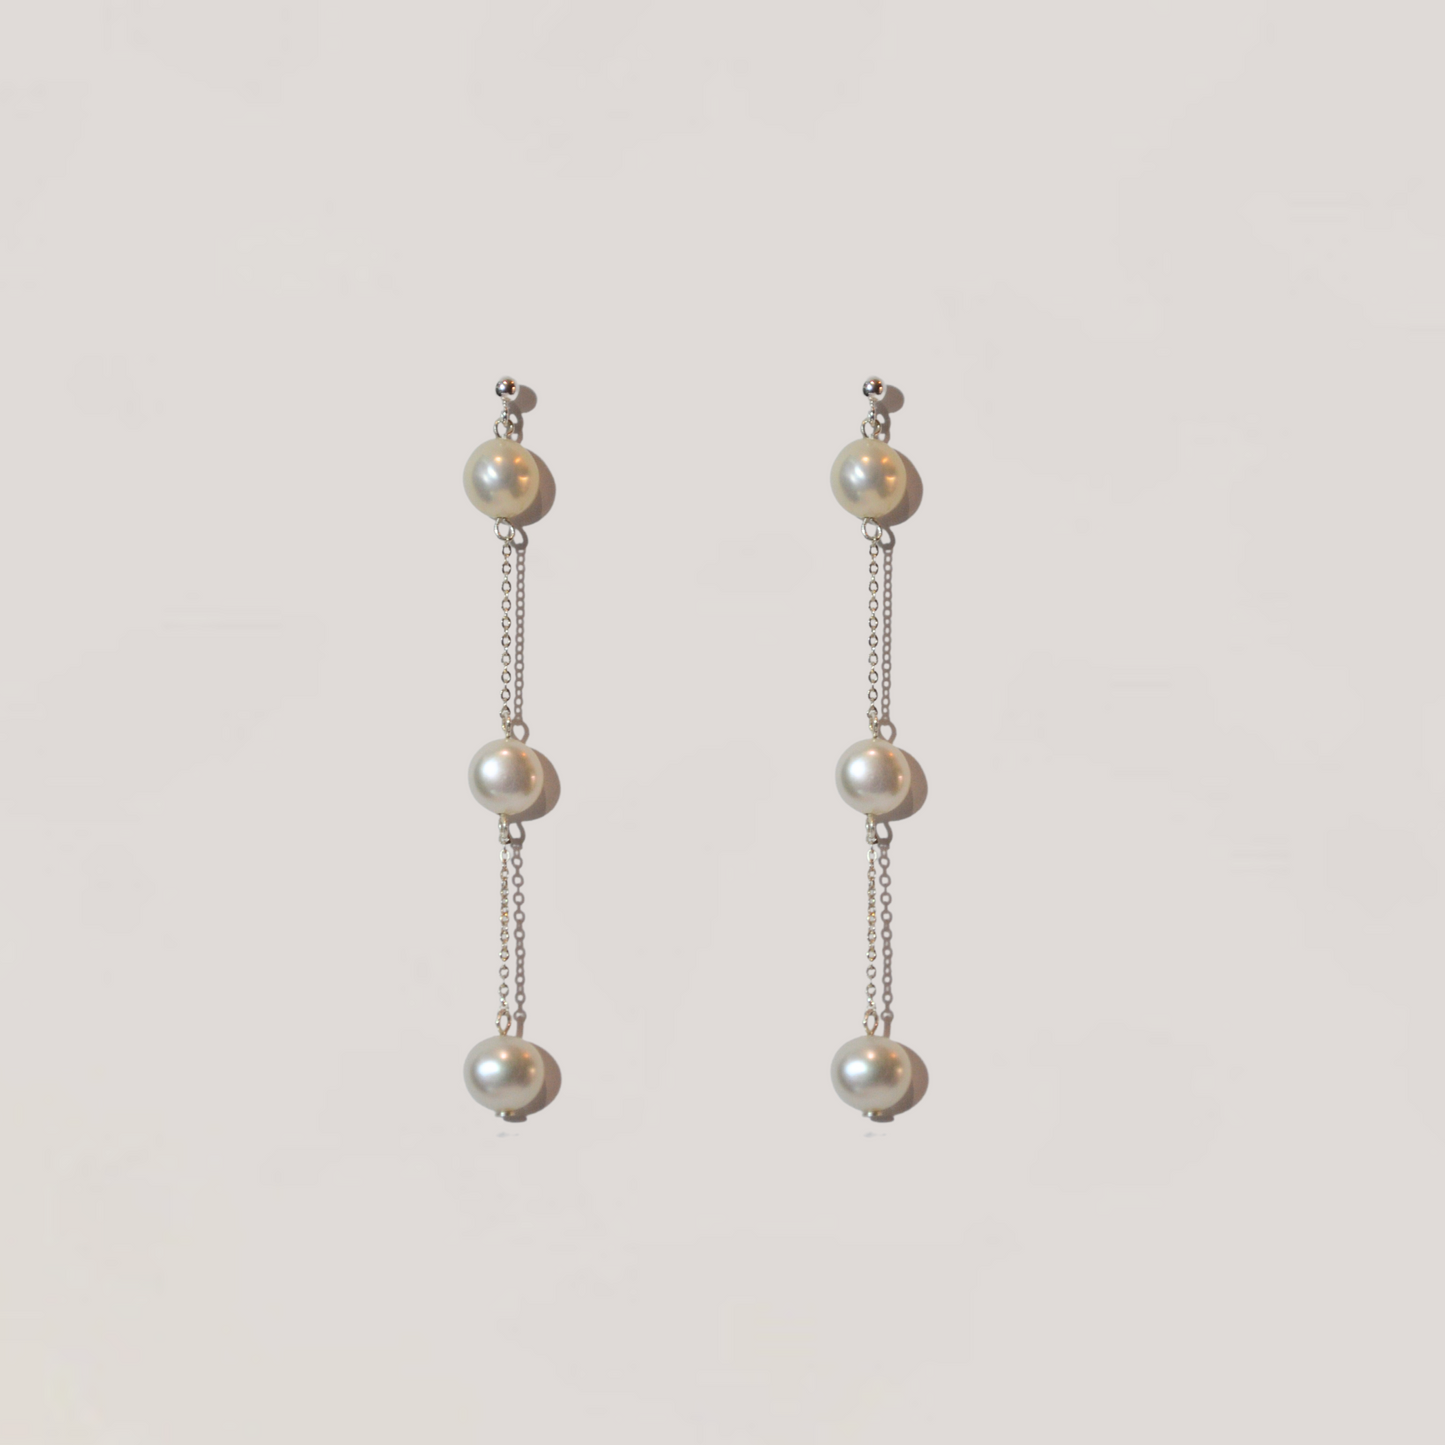 Olivia Collection, long silver chain with 3 pearl drop earrings, bar stud 